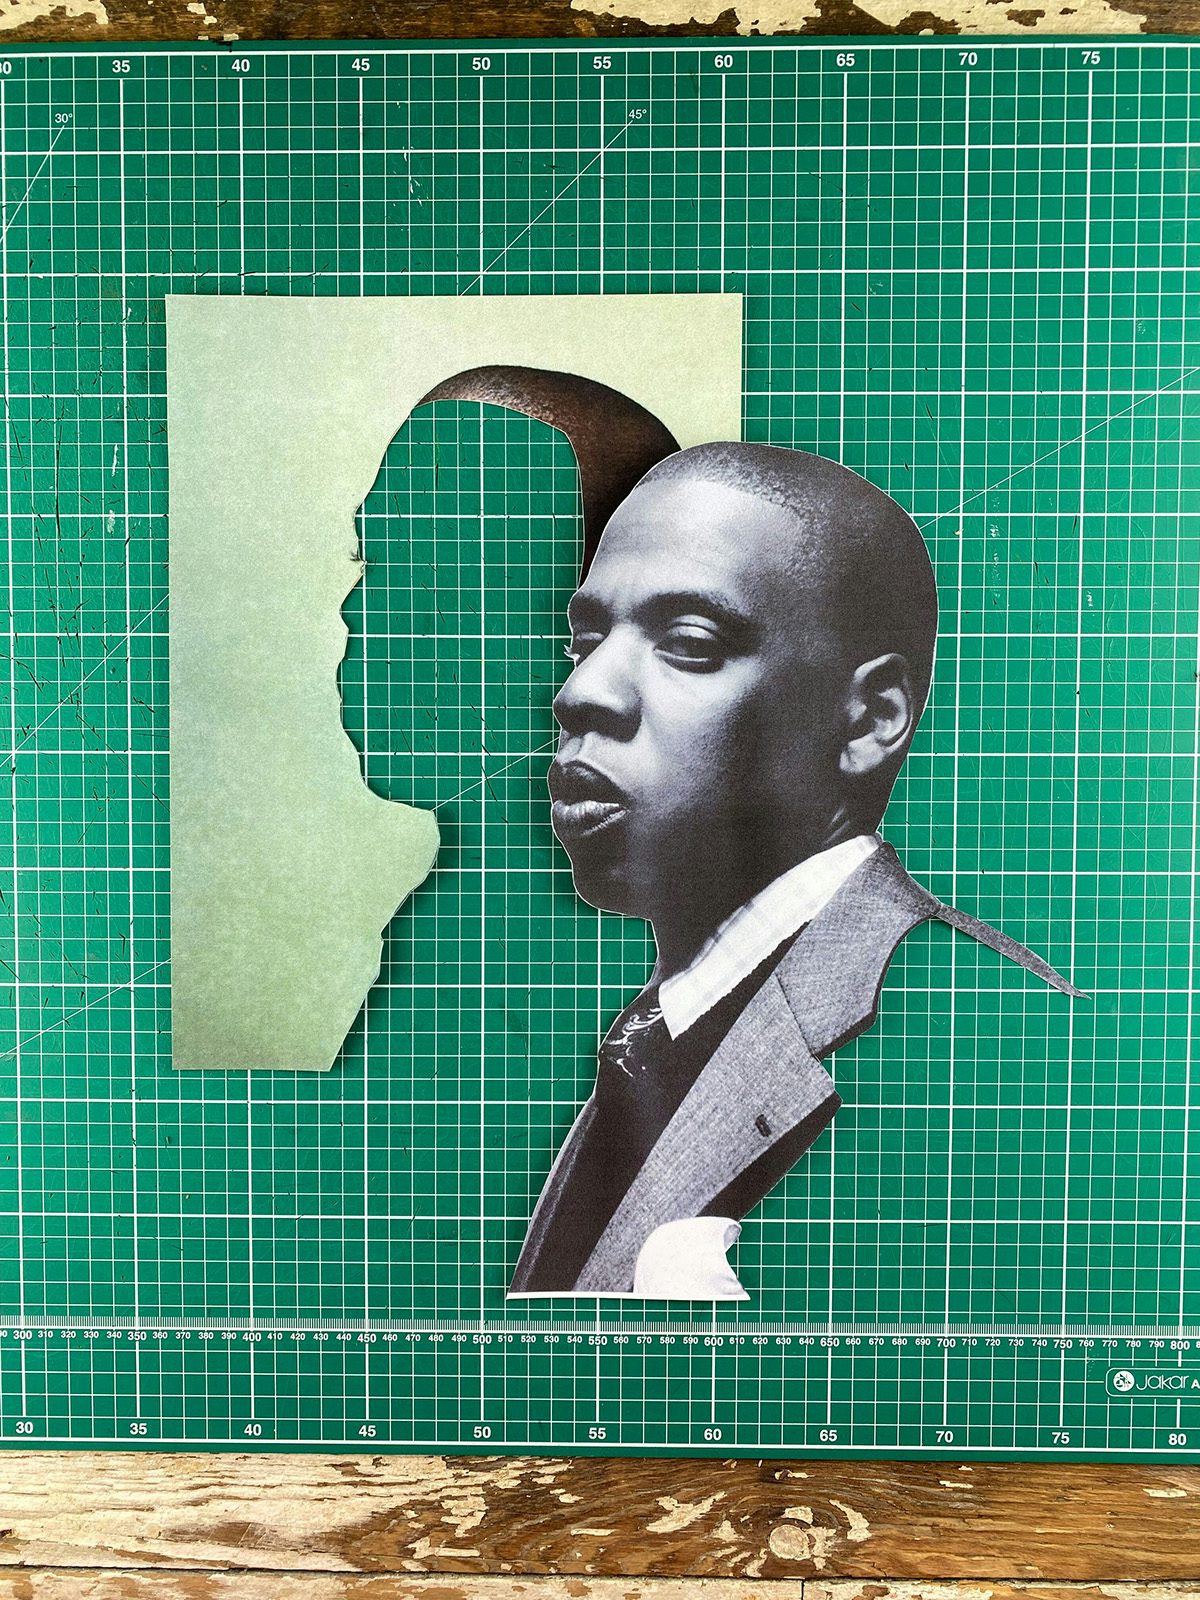 Image shows a black and white portrait photo of Jay Z cut out from its background, shown on a green cutting mat